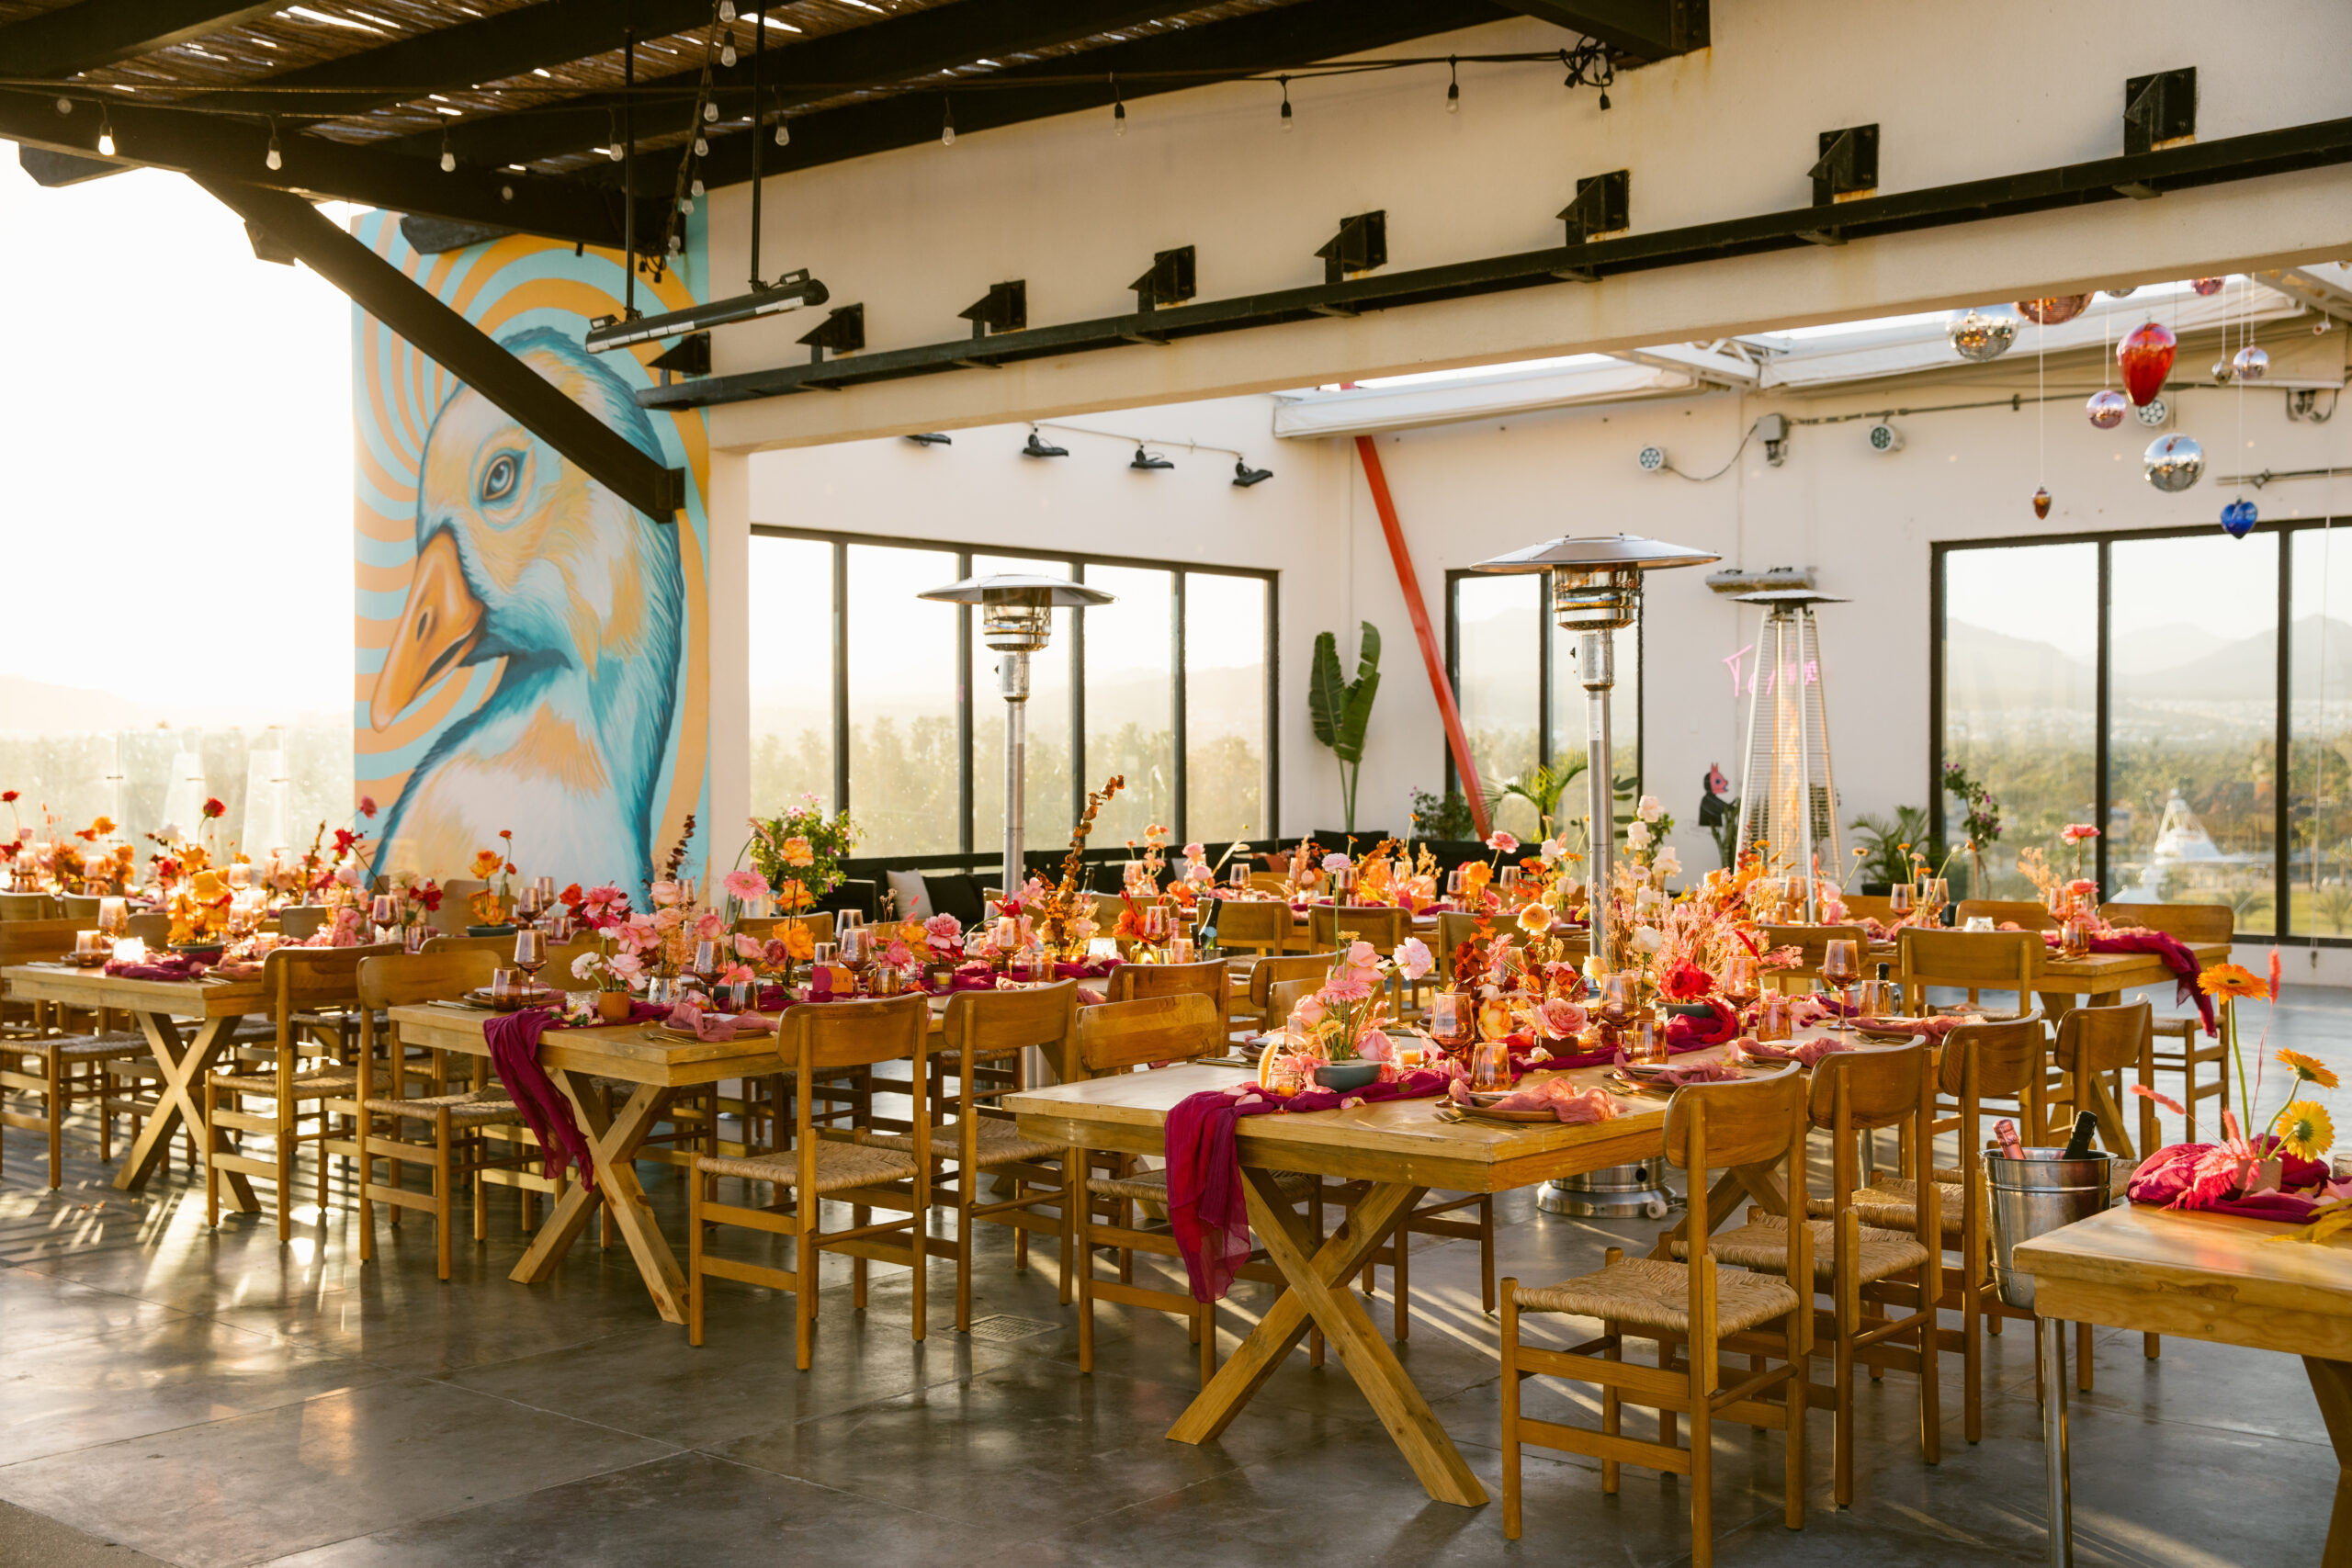 hotel el ganzo rooftop. colorful mexican mural. colorful wedding florals. bright pinks, red, orange, yellow. fuchsia gauze runner on light wooden table with wooden chairs. smokey pink colored glassware. wedding reception tabletop. 
orange and pink custom table number signs. 
blue skies. ocean view. rooftop wedding dinner reception. mauve clay handmade plates. gold flatware

hanging blown glass hearts and disco balls. te amo neon sign. 